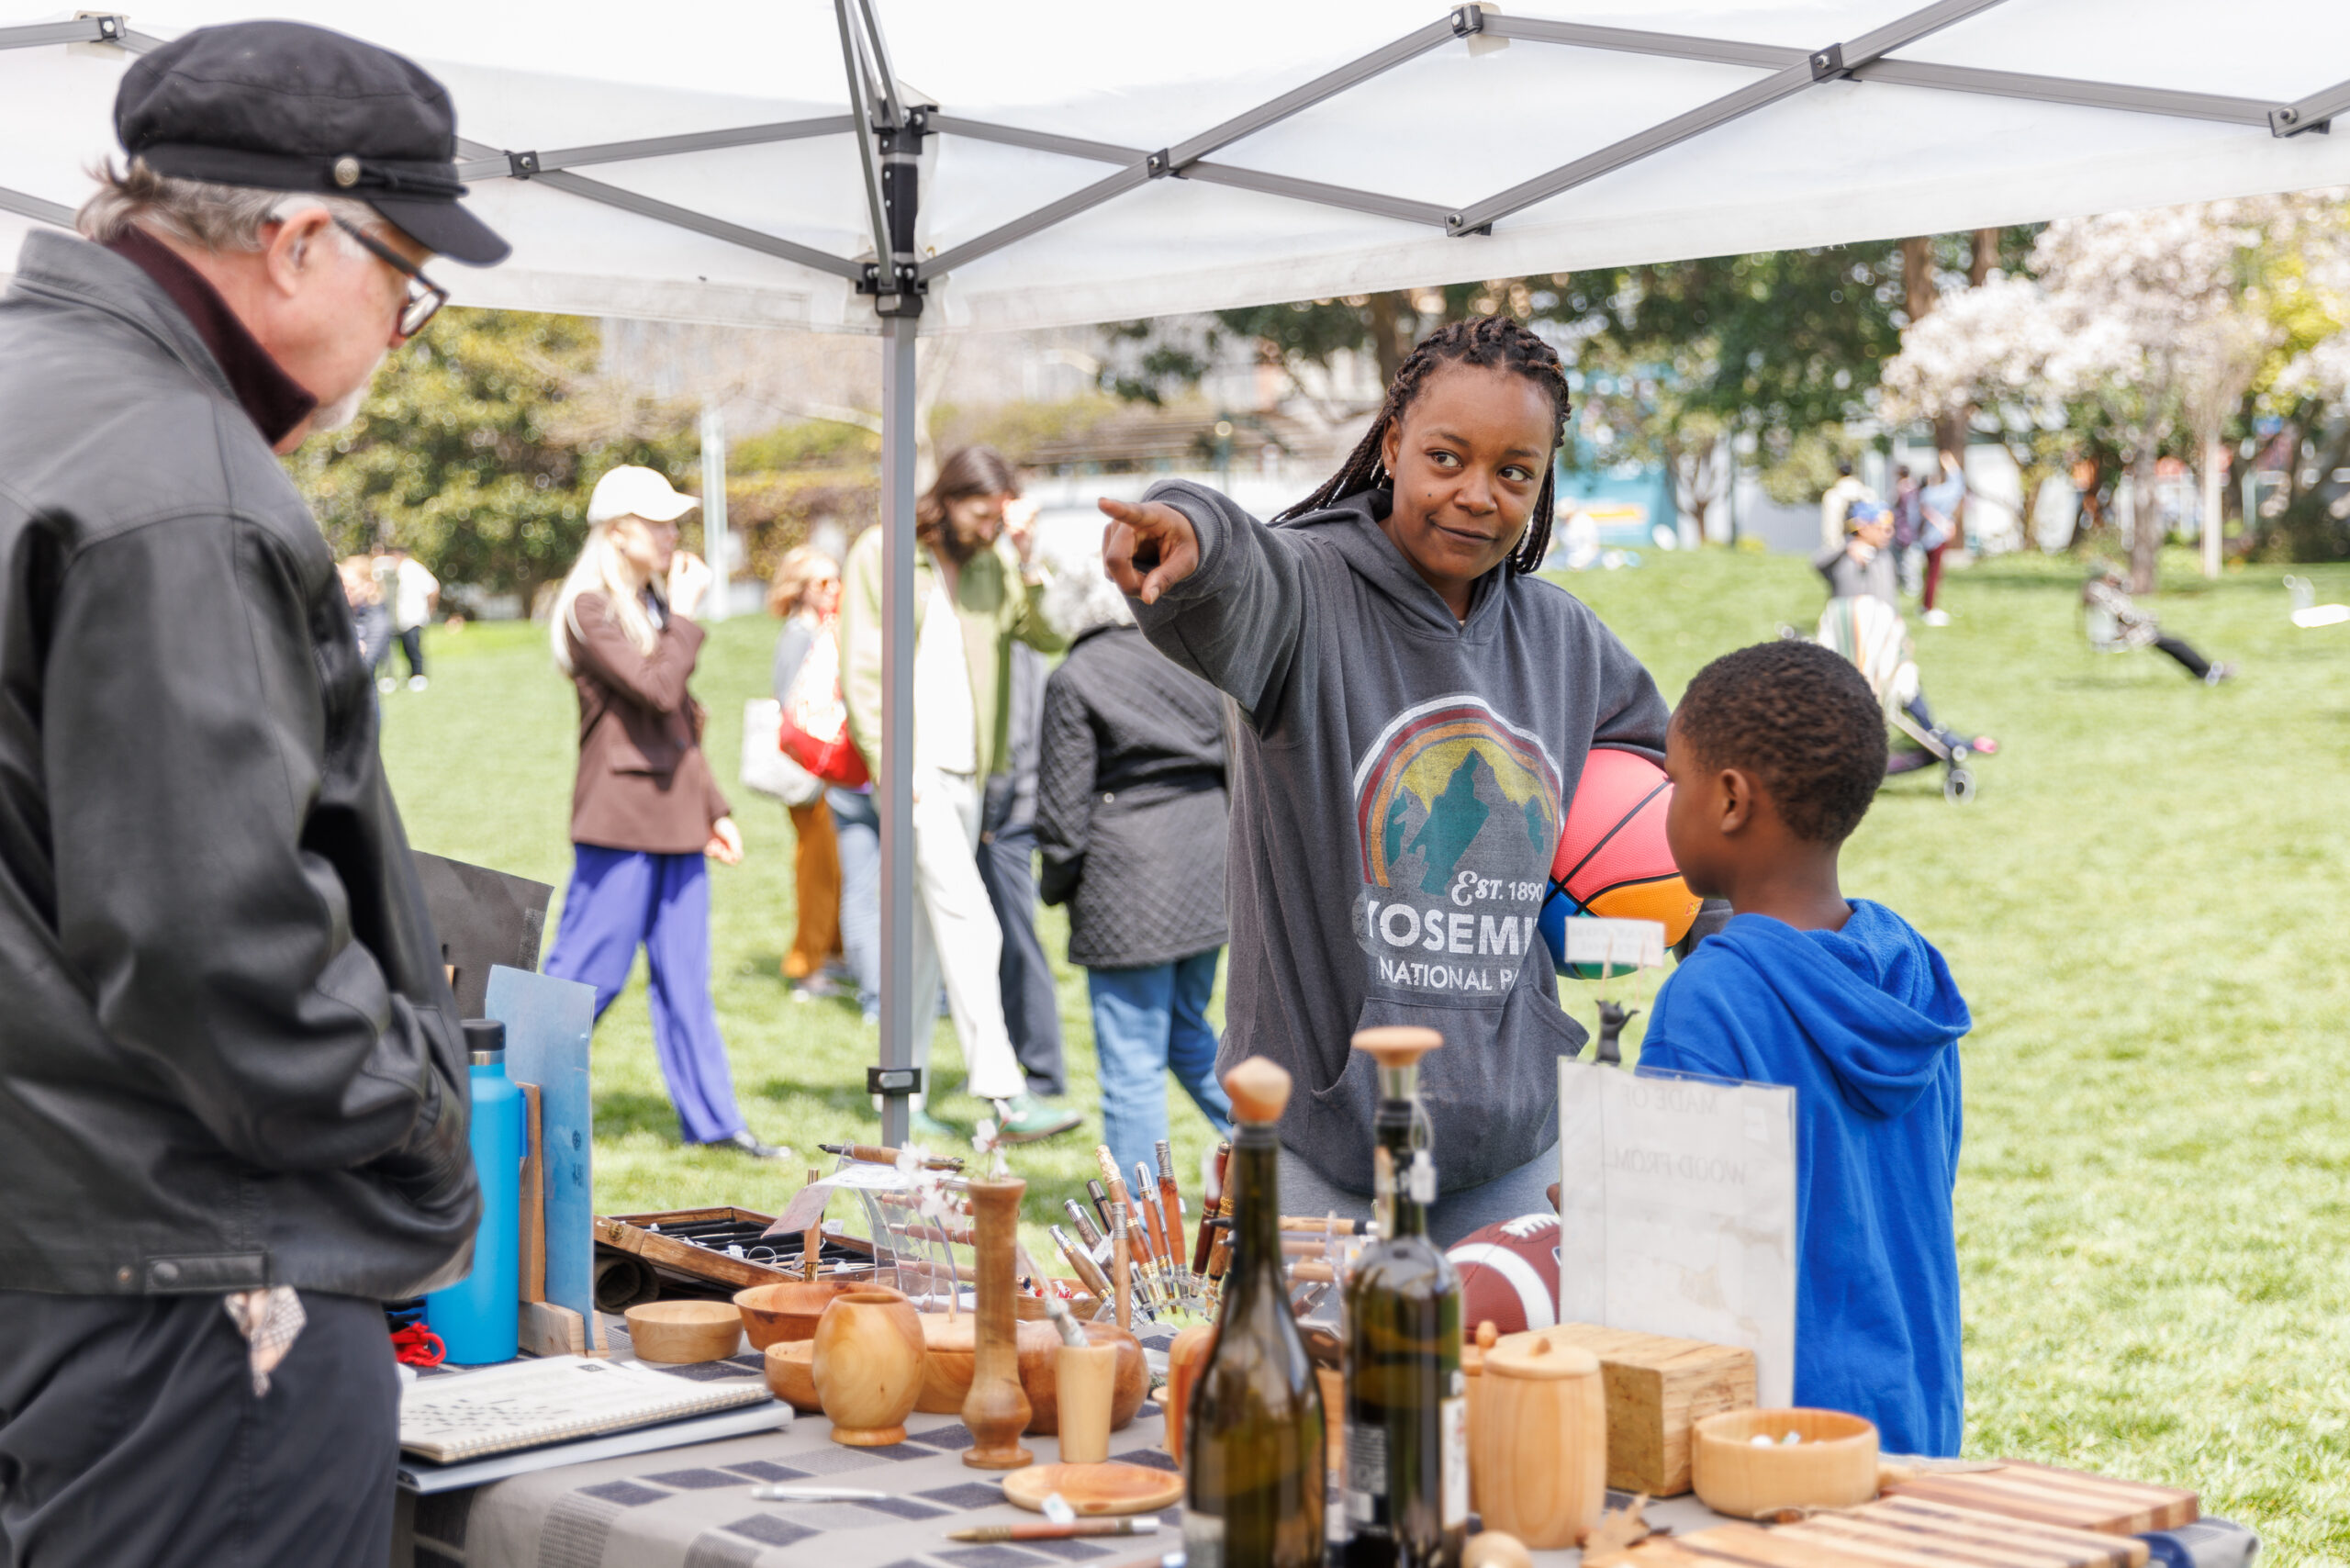 Downtown San Francisco Is in Full Bloom with the Yerba Buena Art & Makers Market